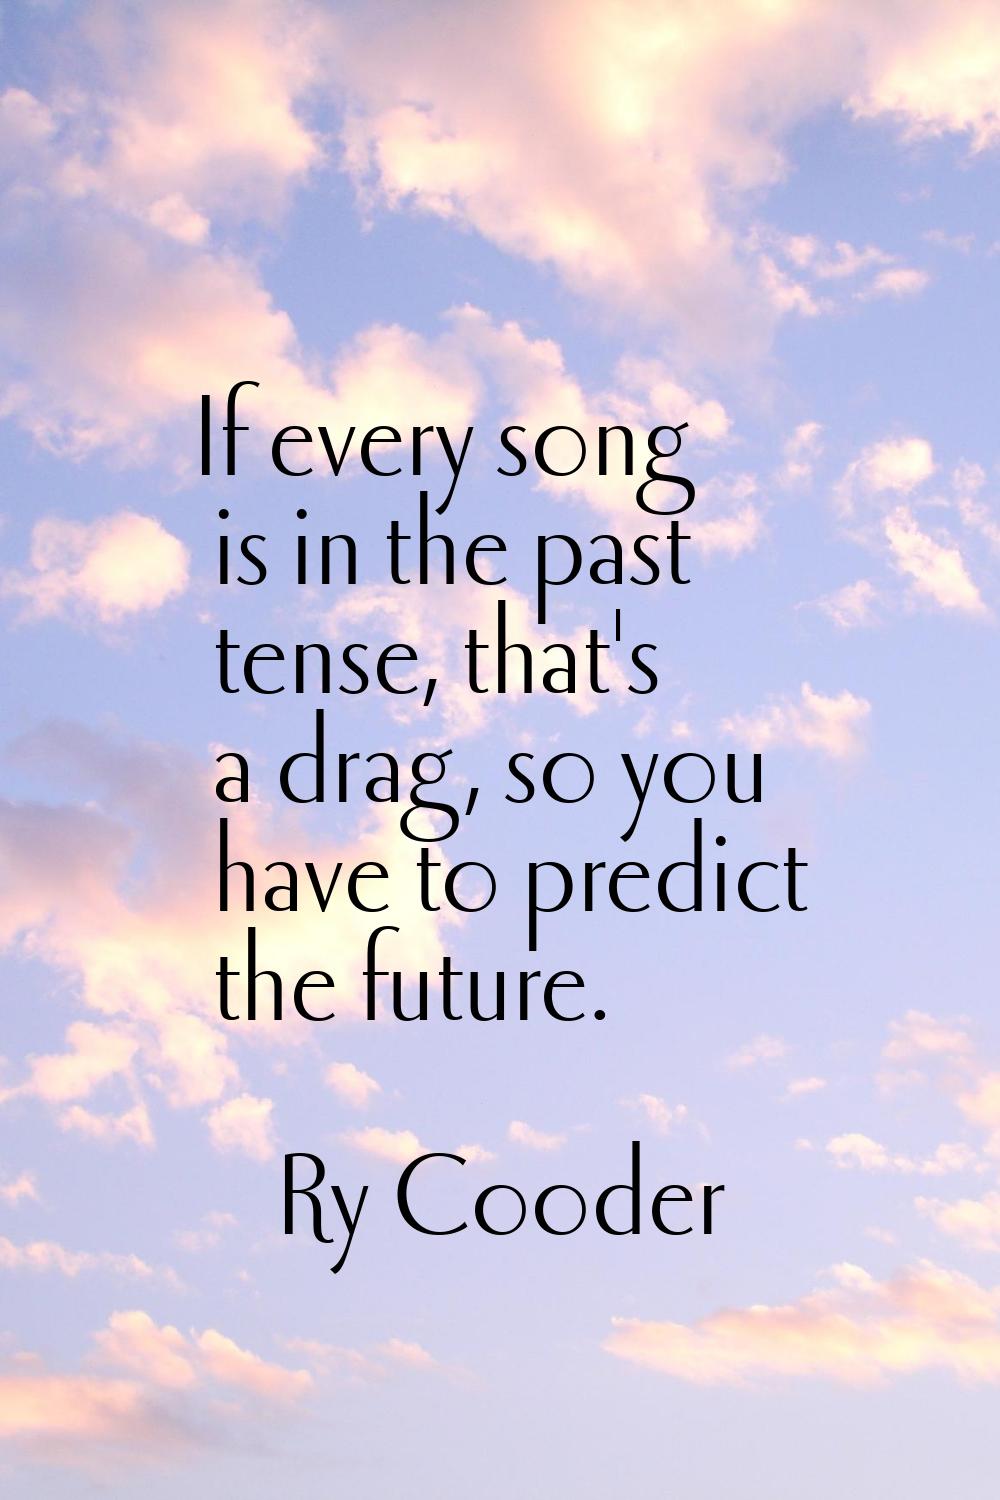 If every song is in the past tense, that's a drag, so you have to predict the future.